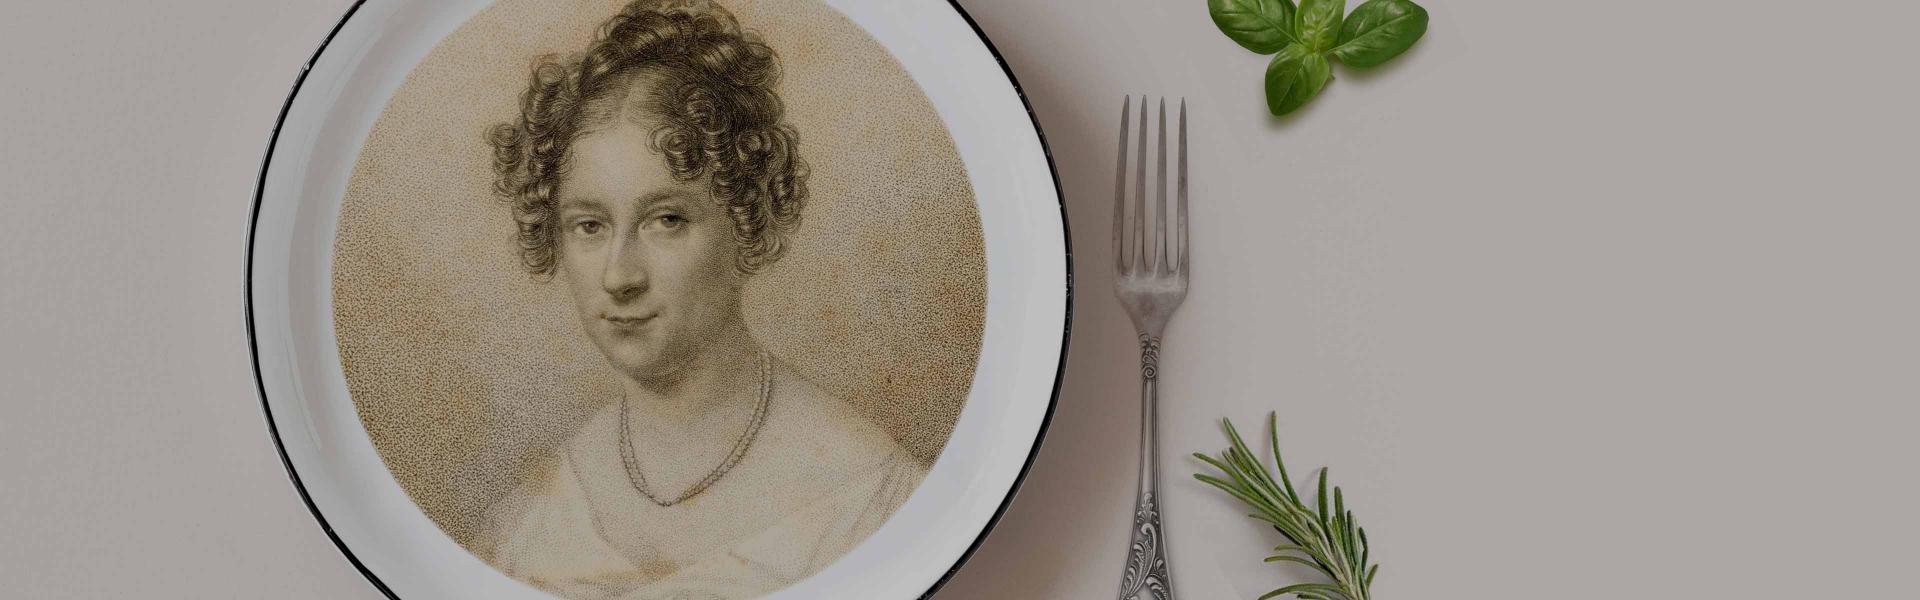 Plate decorated with a portrait drawing of Rahel Varnhagen, herbs and a fork next to it.